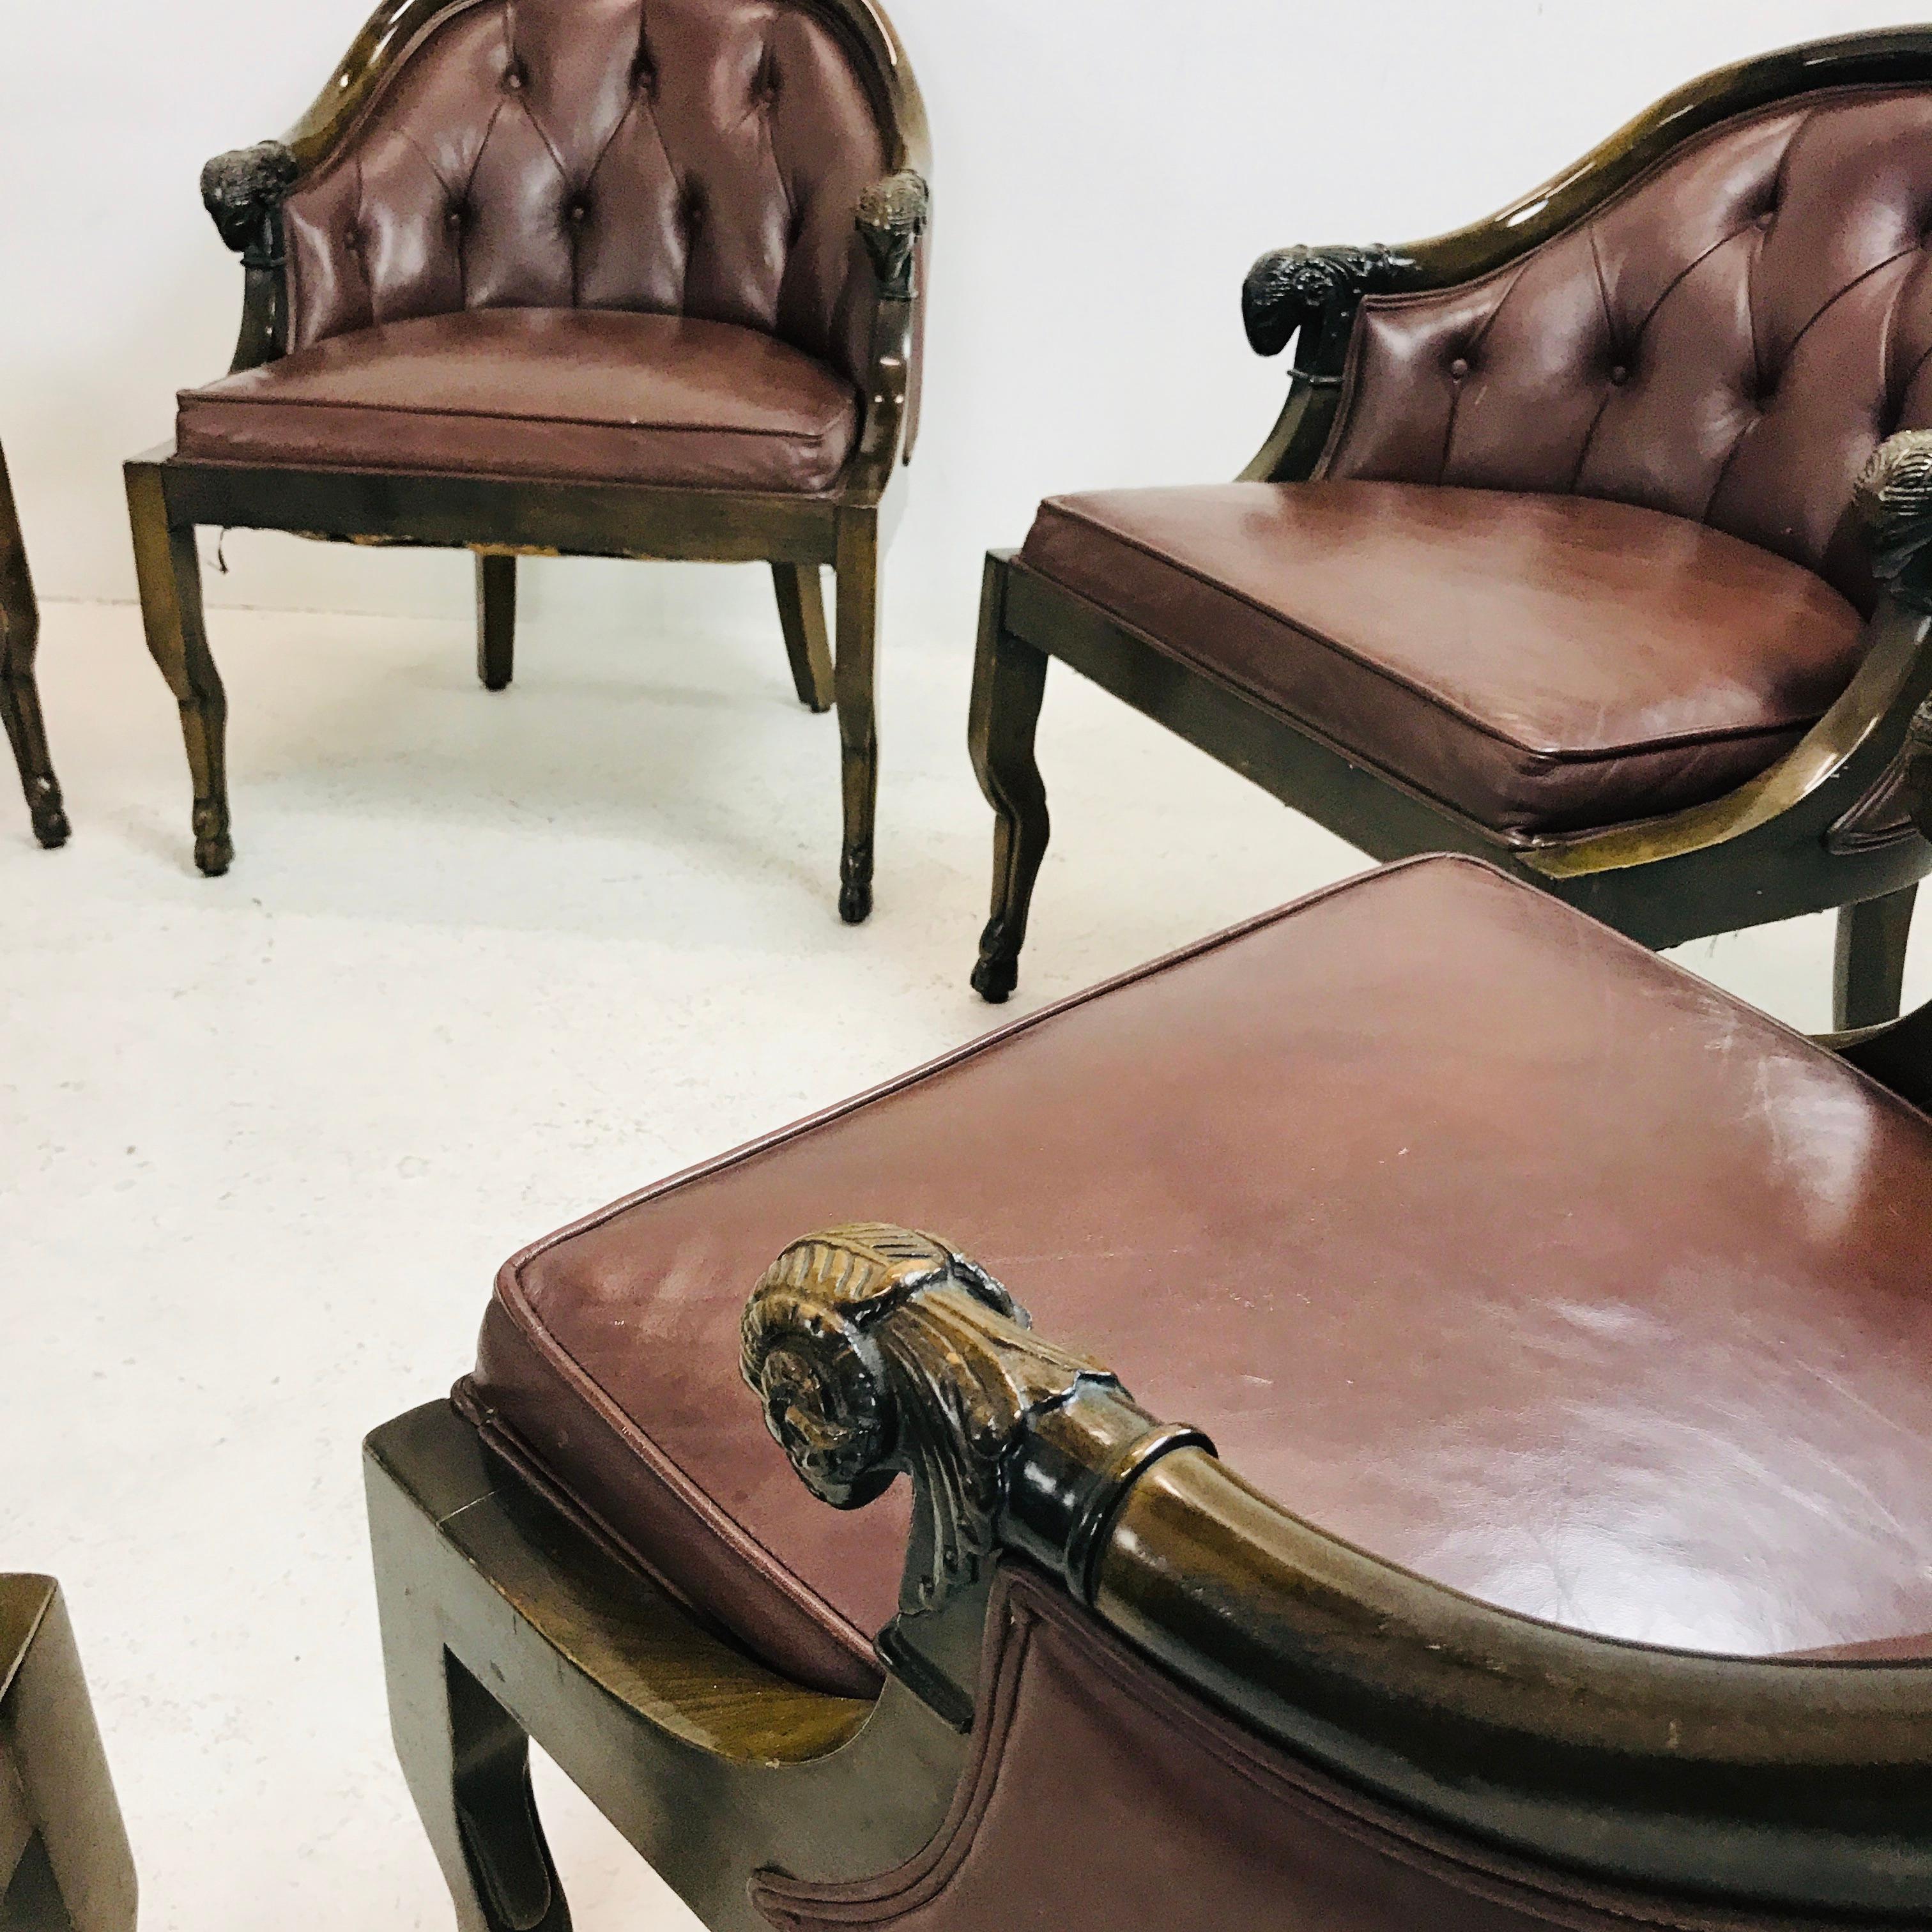 Set of 6 striking ram's head armchairs by Monteverdi-Young. These mahogany leather club chairs feature carved solid walnut ram heads at arms and cloven front feet.